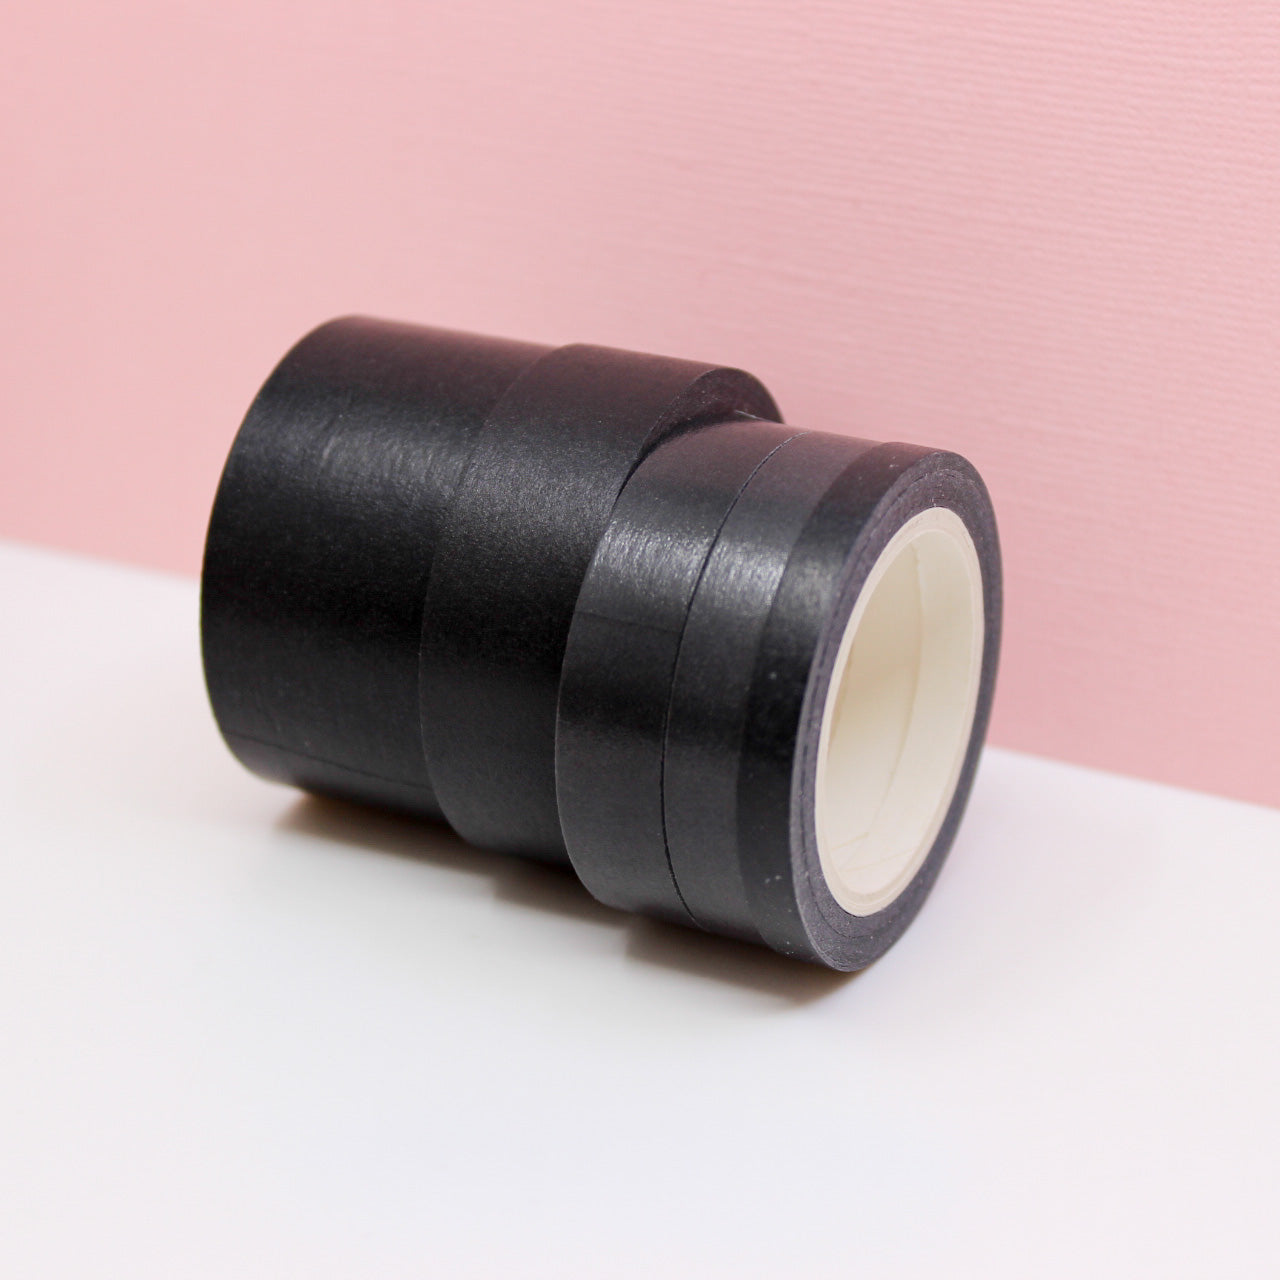 Enhance your crafts with our solid black washi tape, featuring a sleek and versatile design in a classic black hue, perfect for adding depth and contrast to your projects. This tape is sold at BBB Supplies Craft Shop.